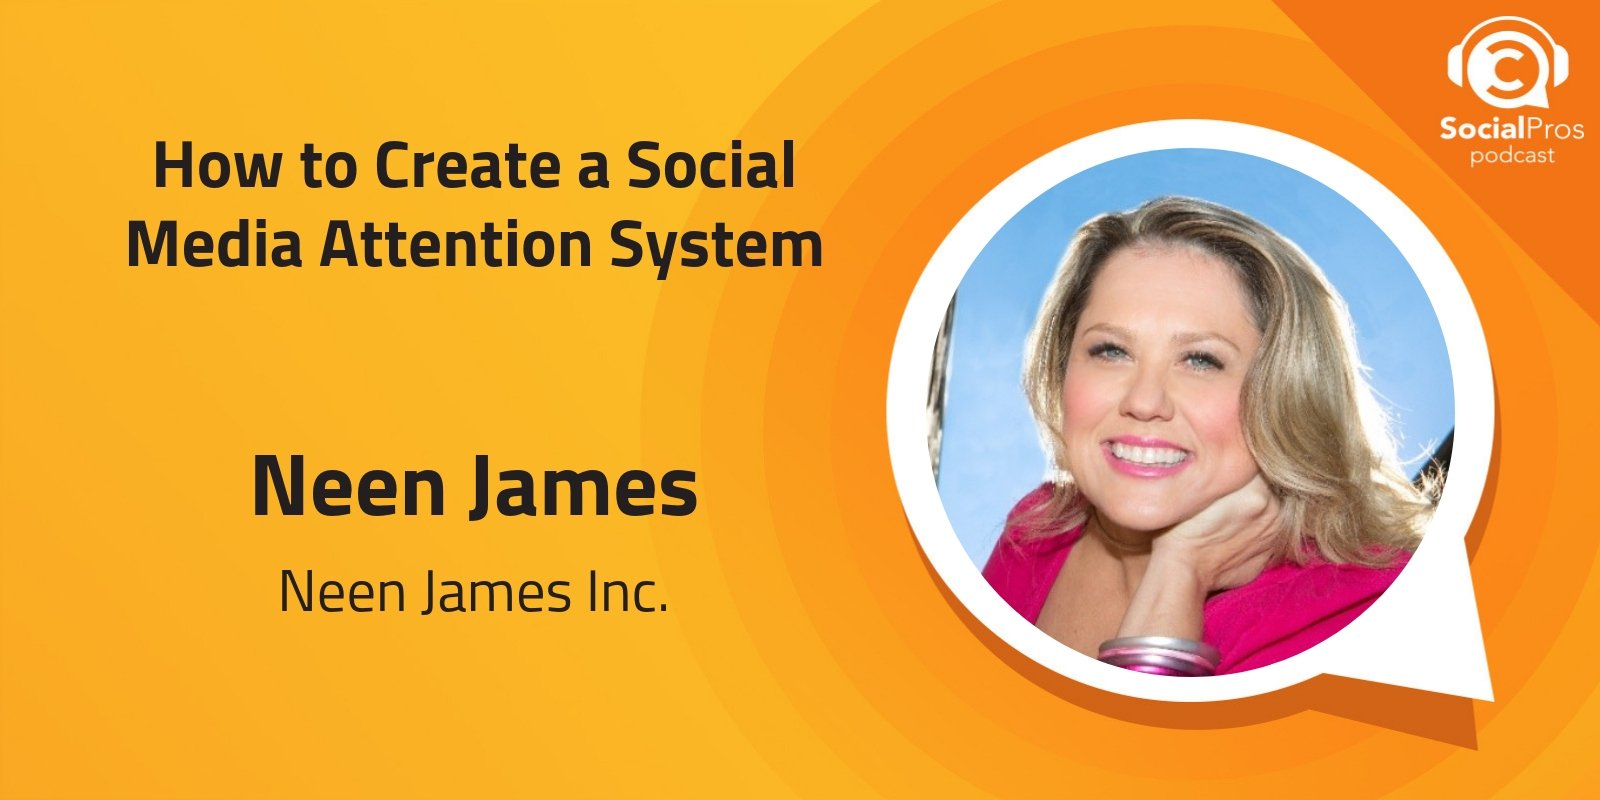 How to Create a Social Media Attention System